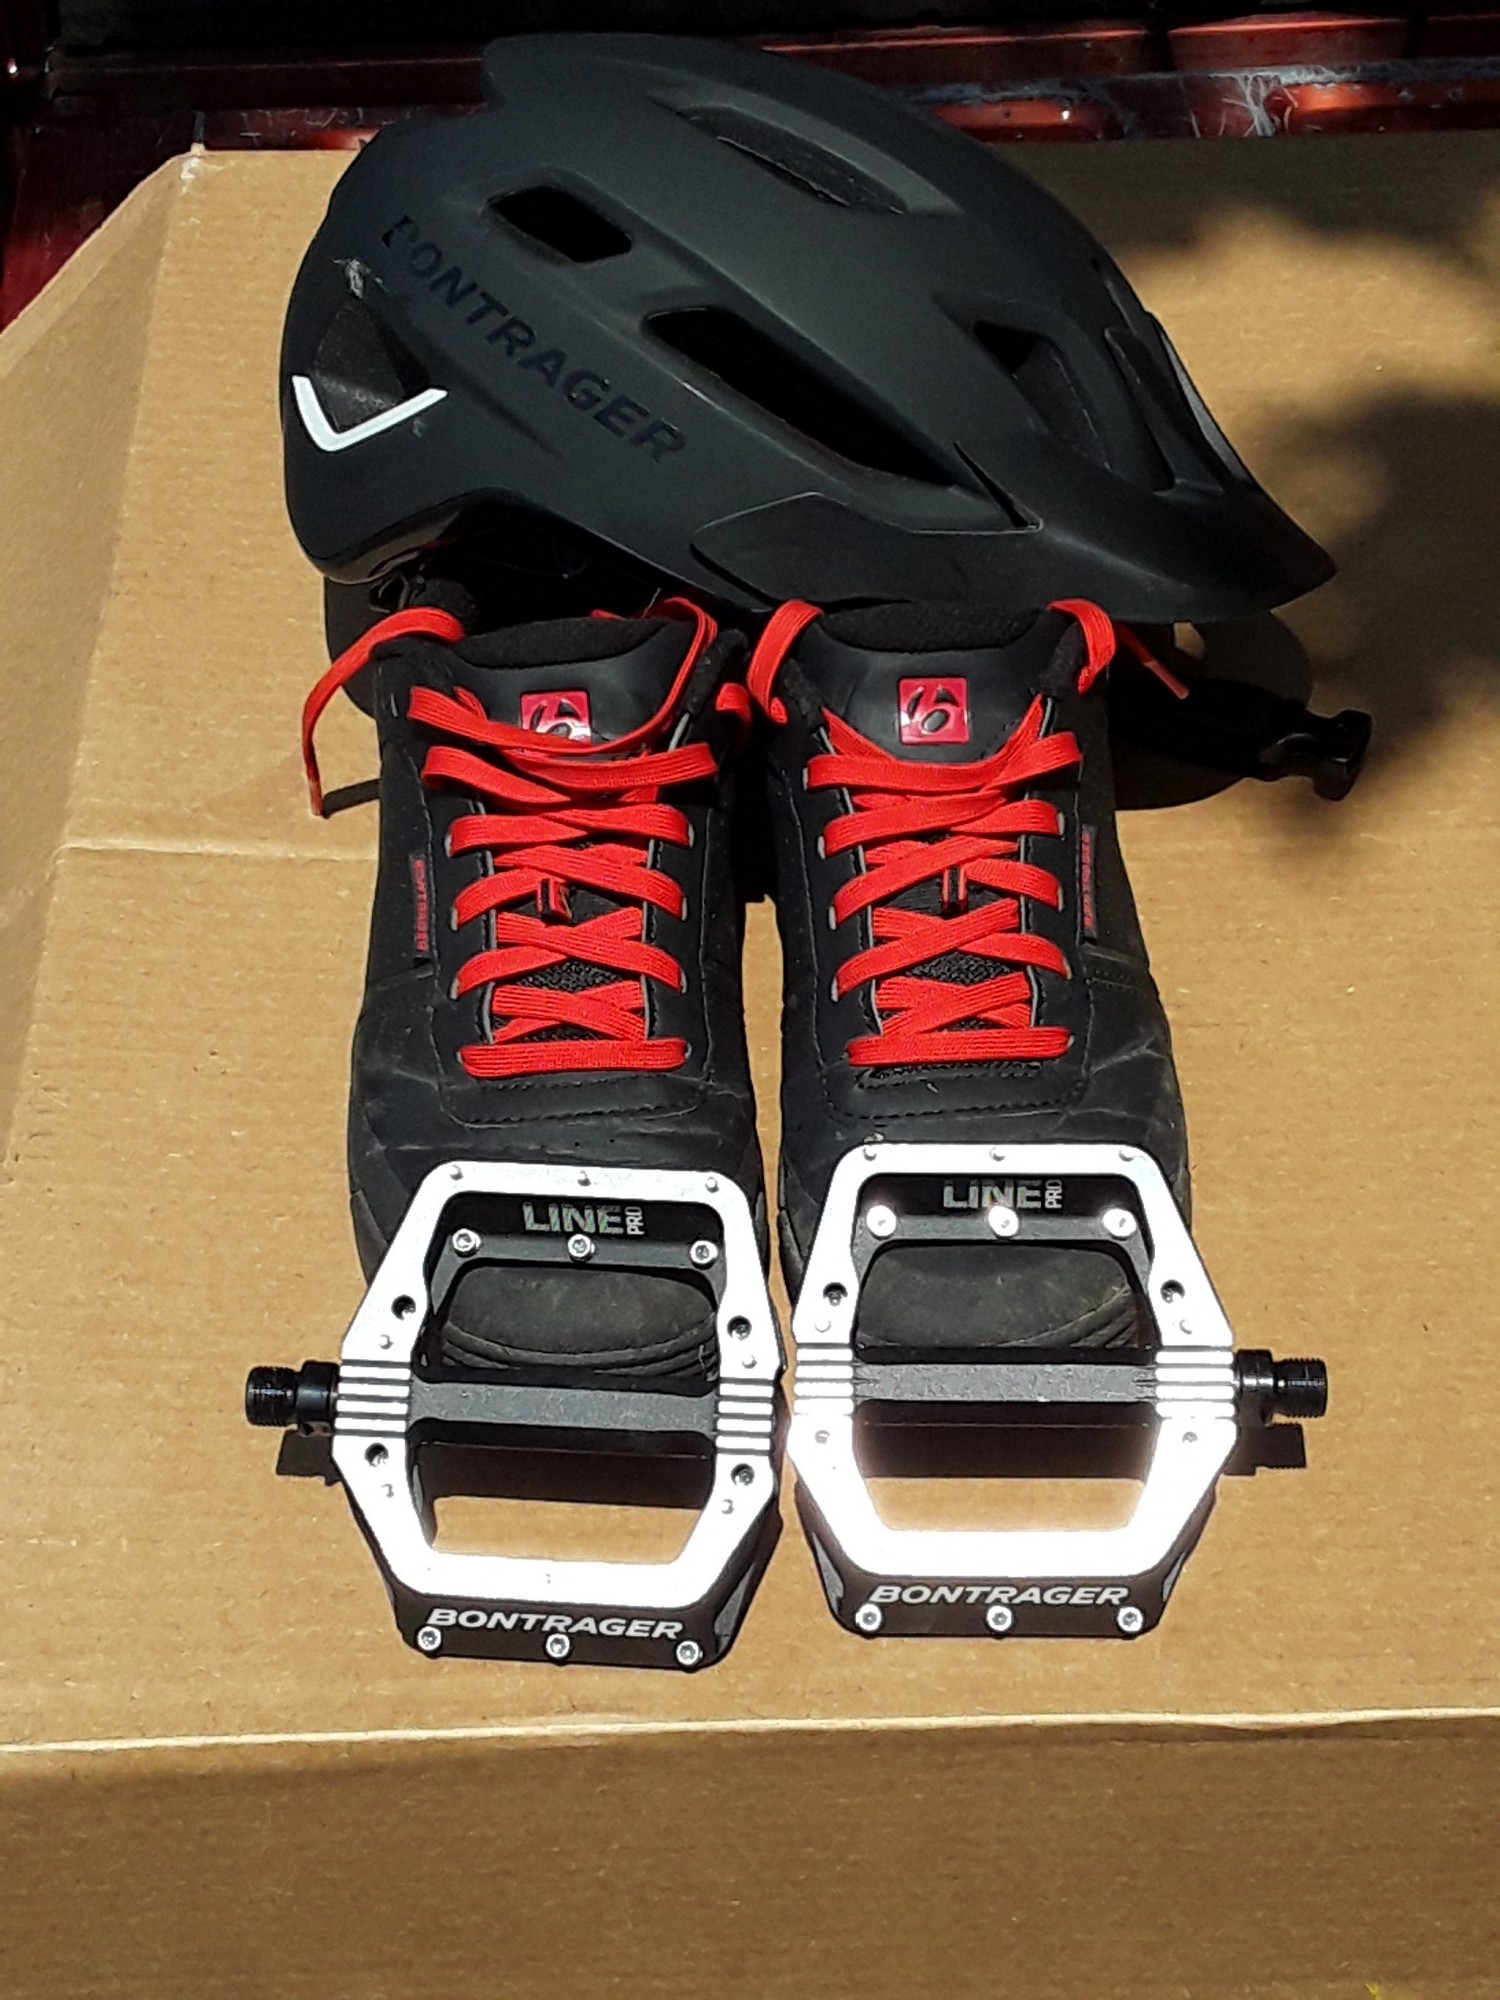 Bontrager’s Trifecta: Helmet, Shoes, and Pedals